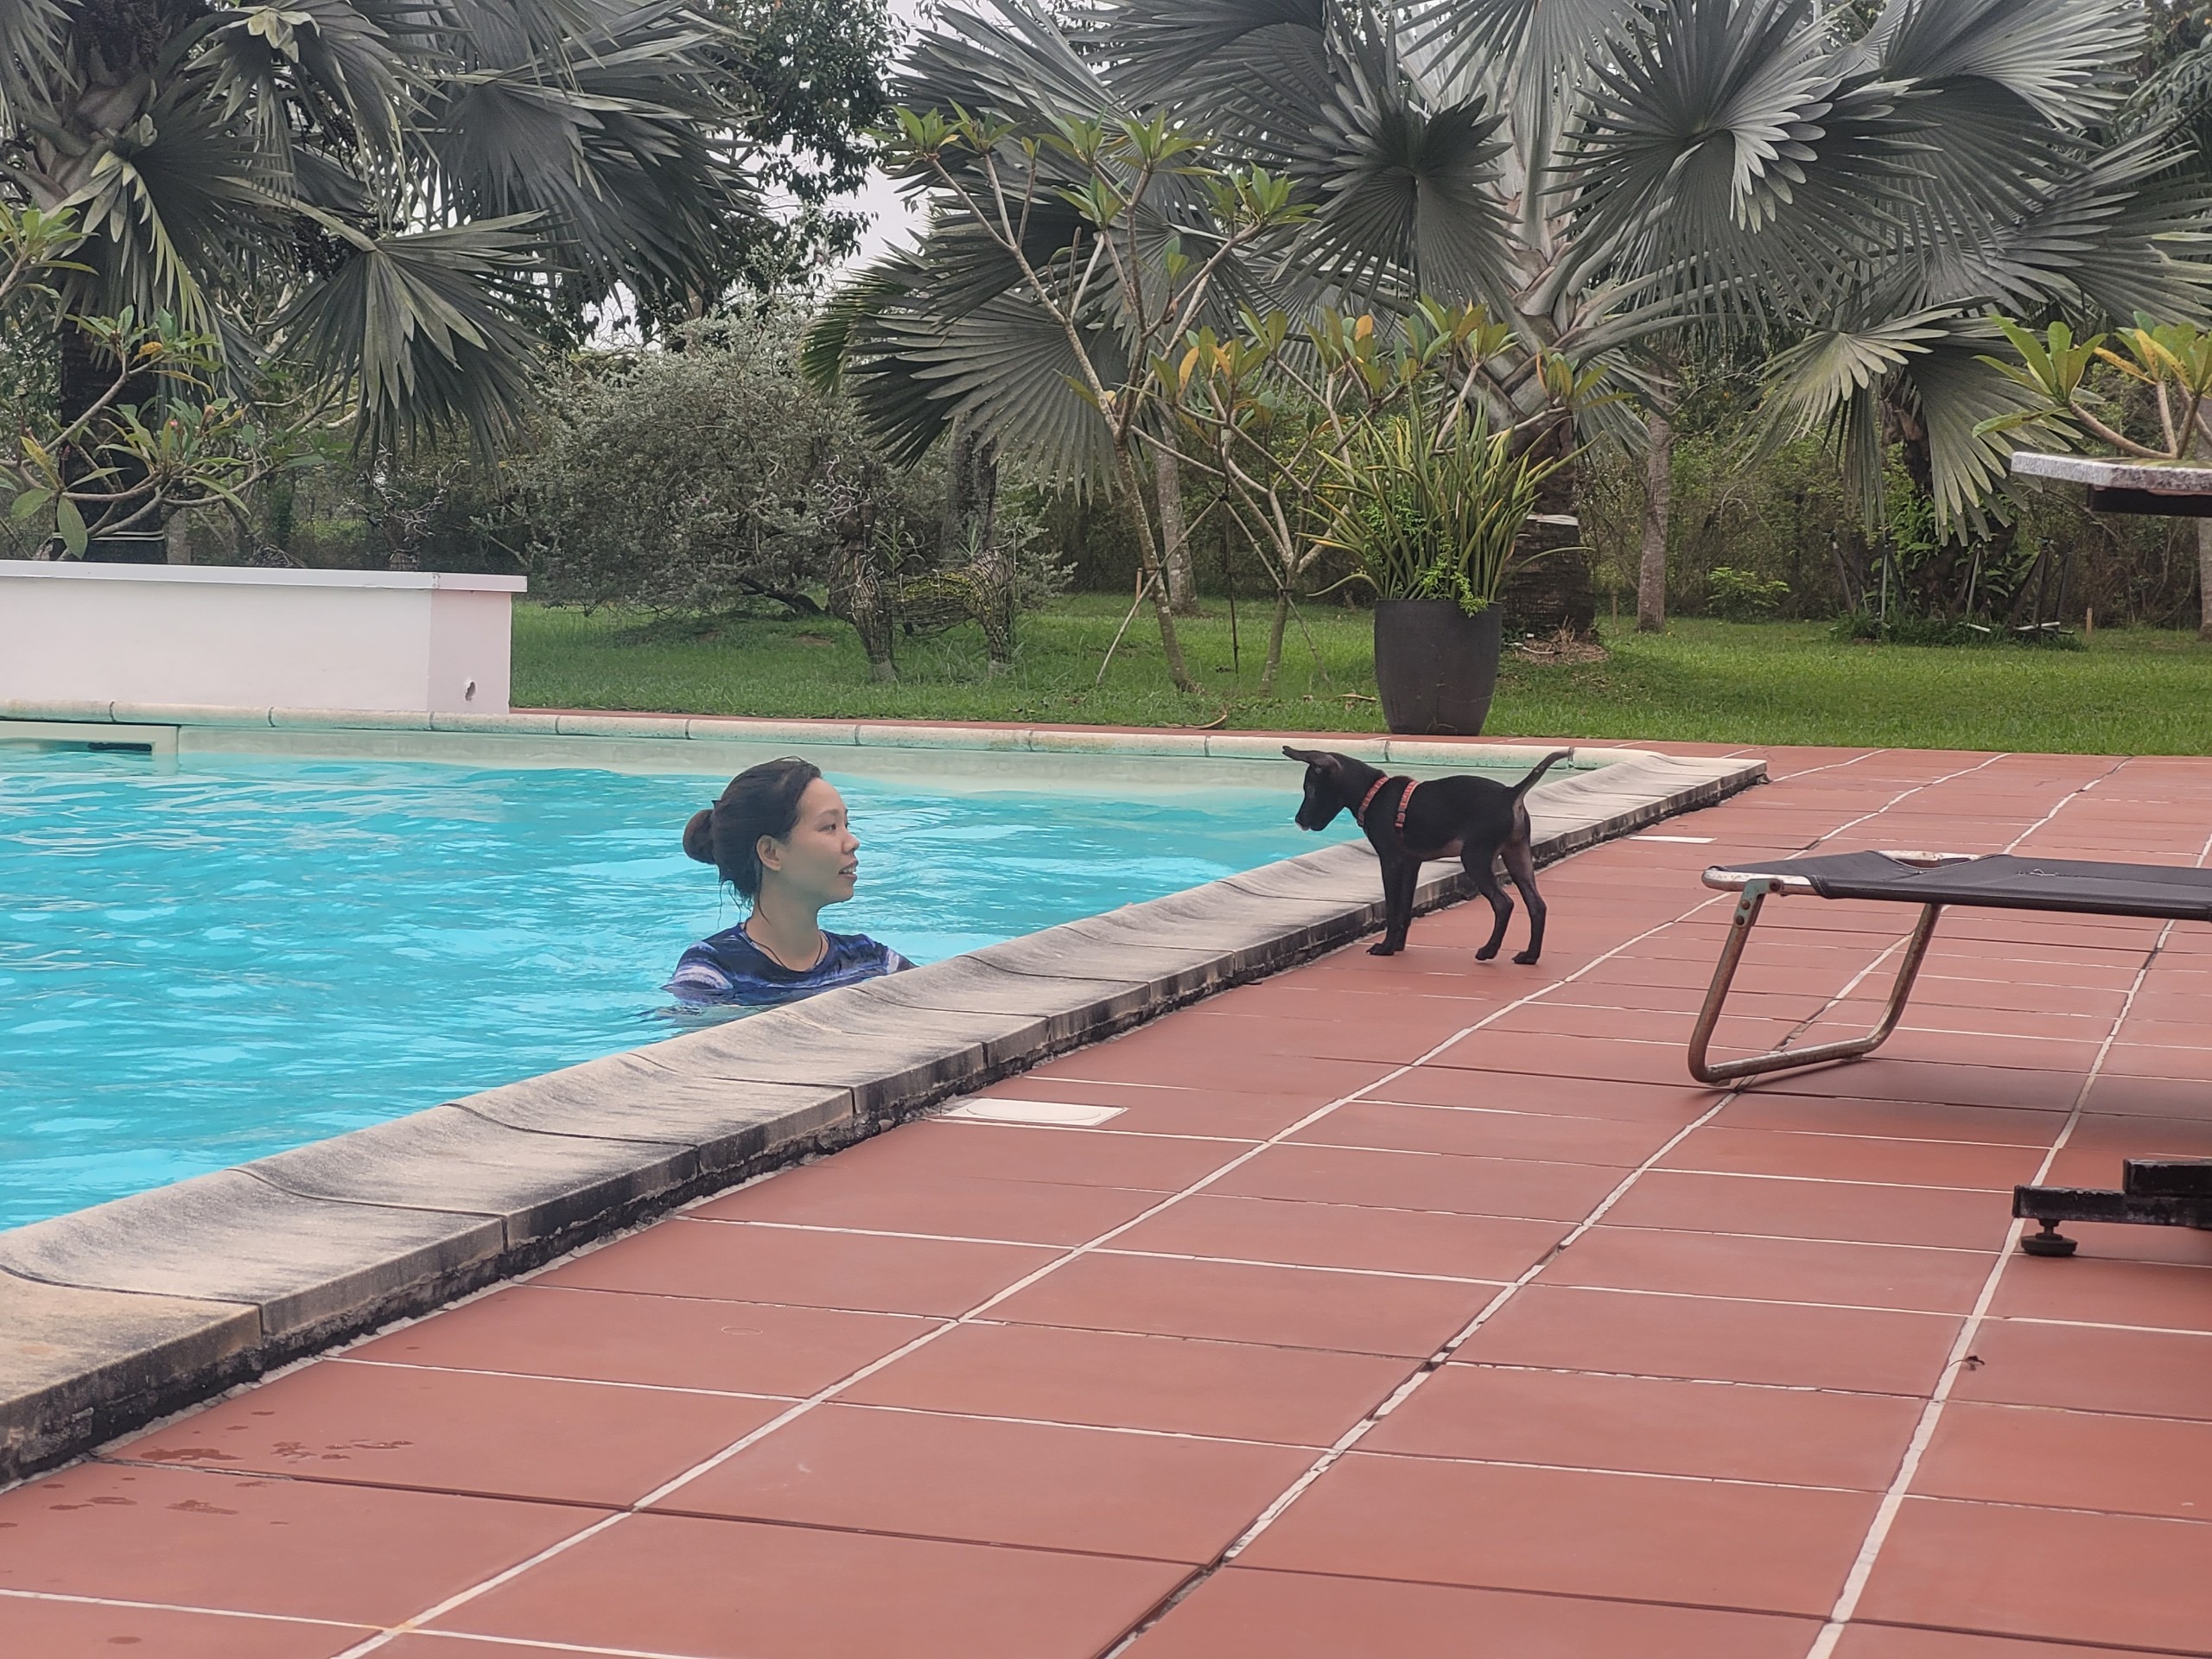 Vu Thi Loan, Kuschert's wife, and the couple's pet dog enjoy their time at a pet friendly resort in Cu Chi District, Ho Chi Minh City. Photo: Ray Kuschert / Tuoi Tre News